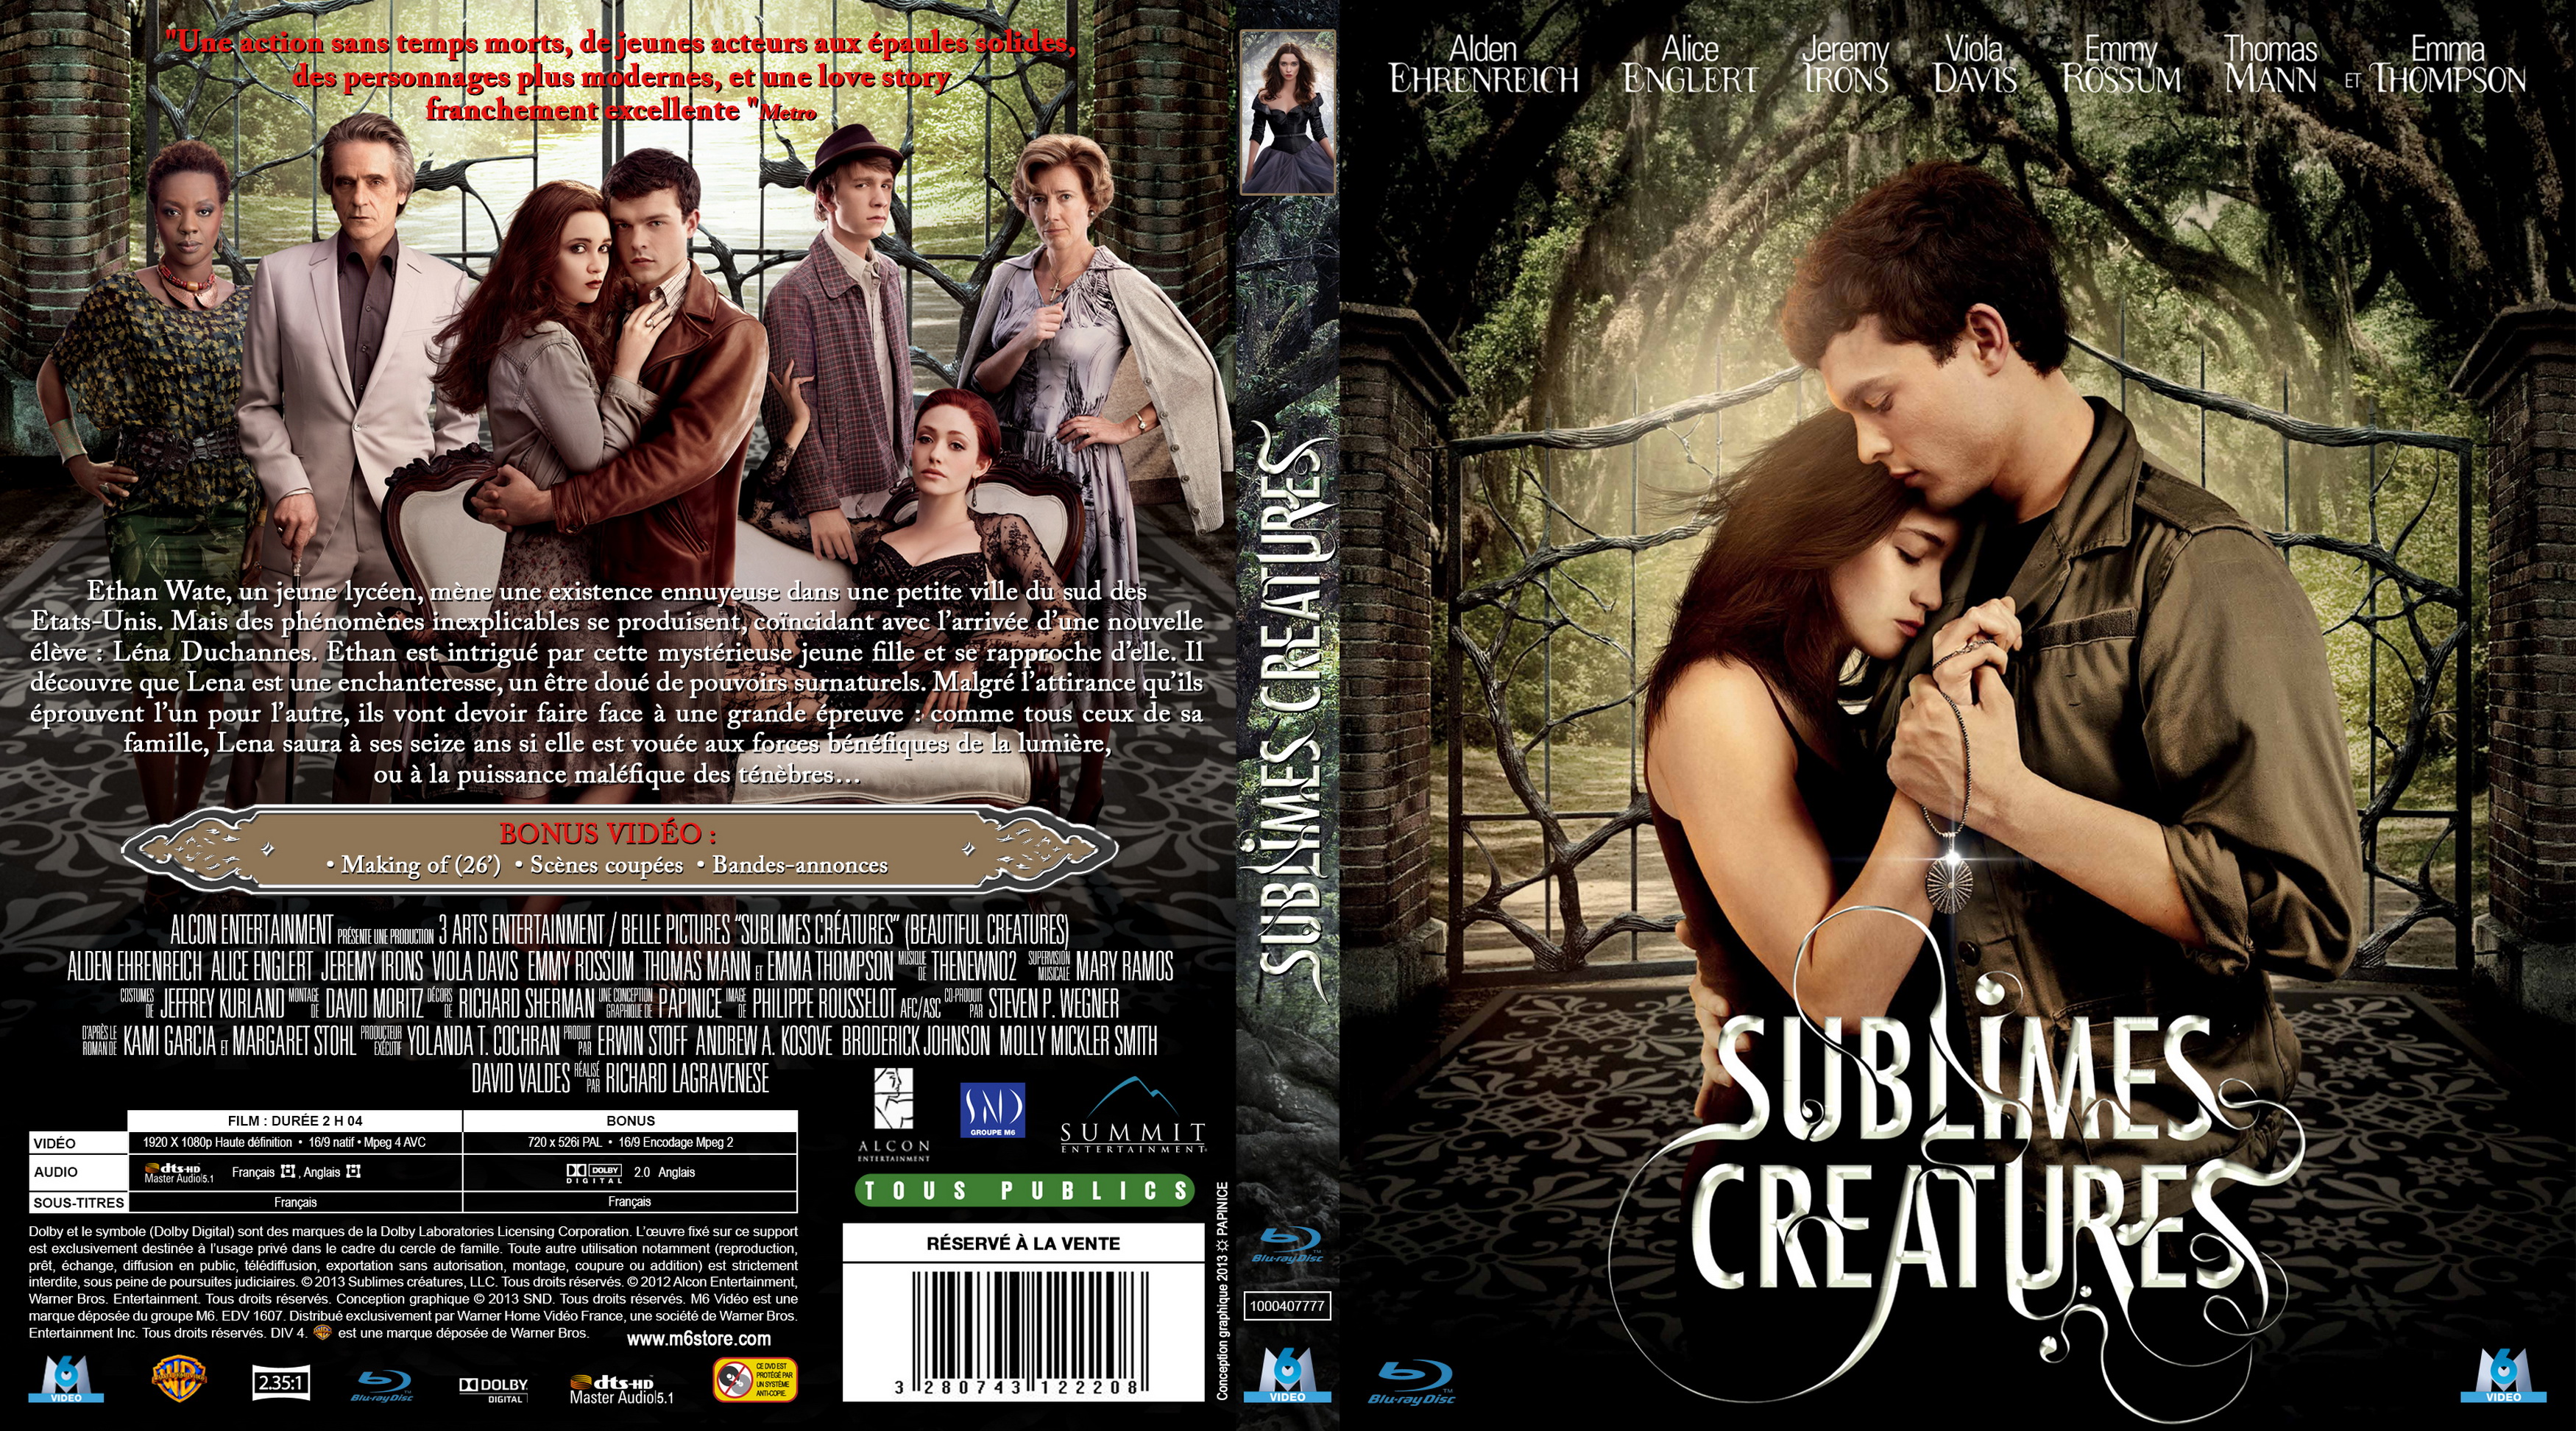 Jaquette DVD Sublimes cratures custom (BLU-RAY)